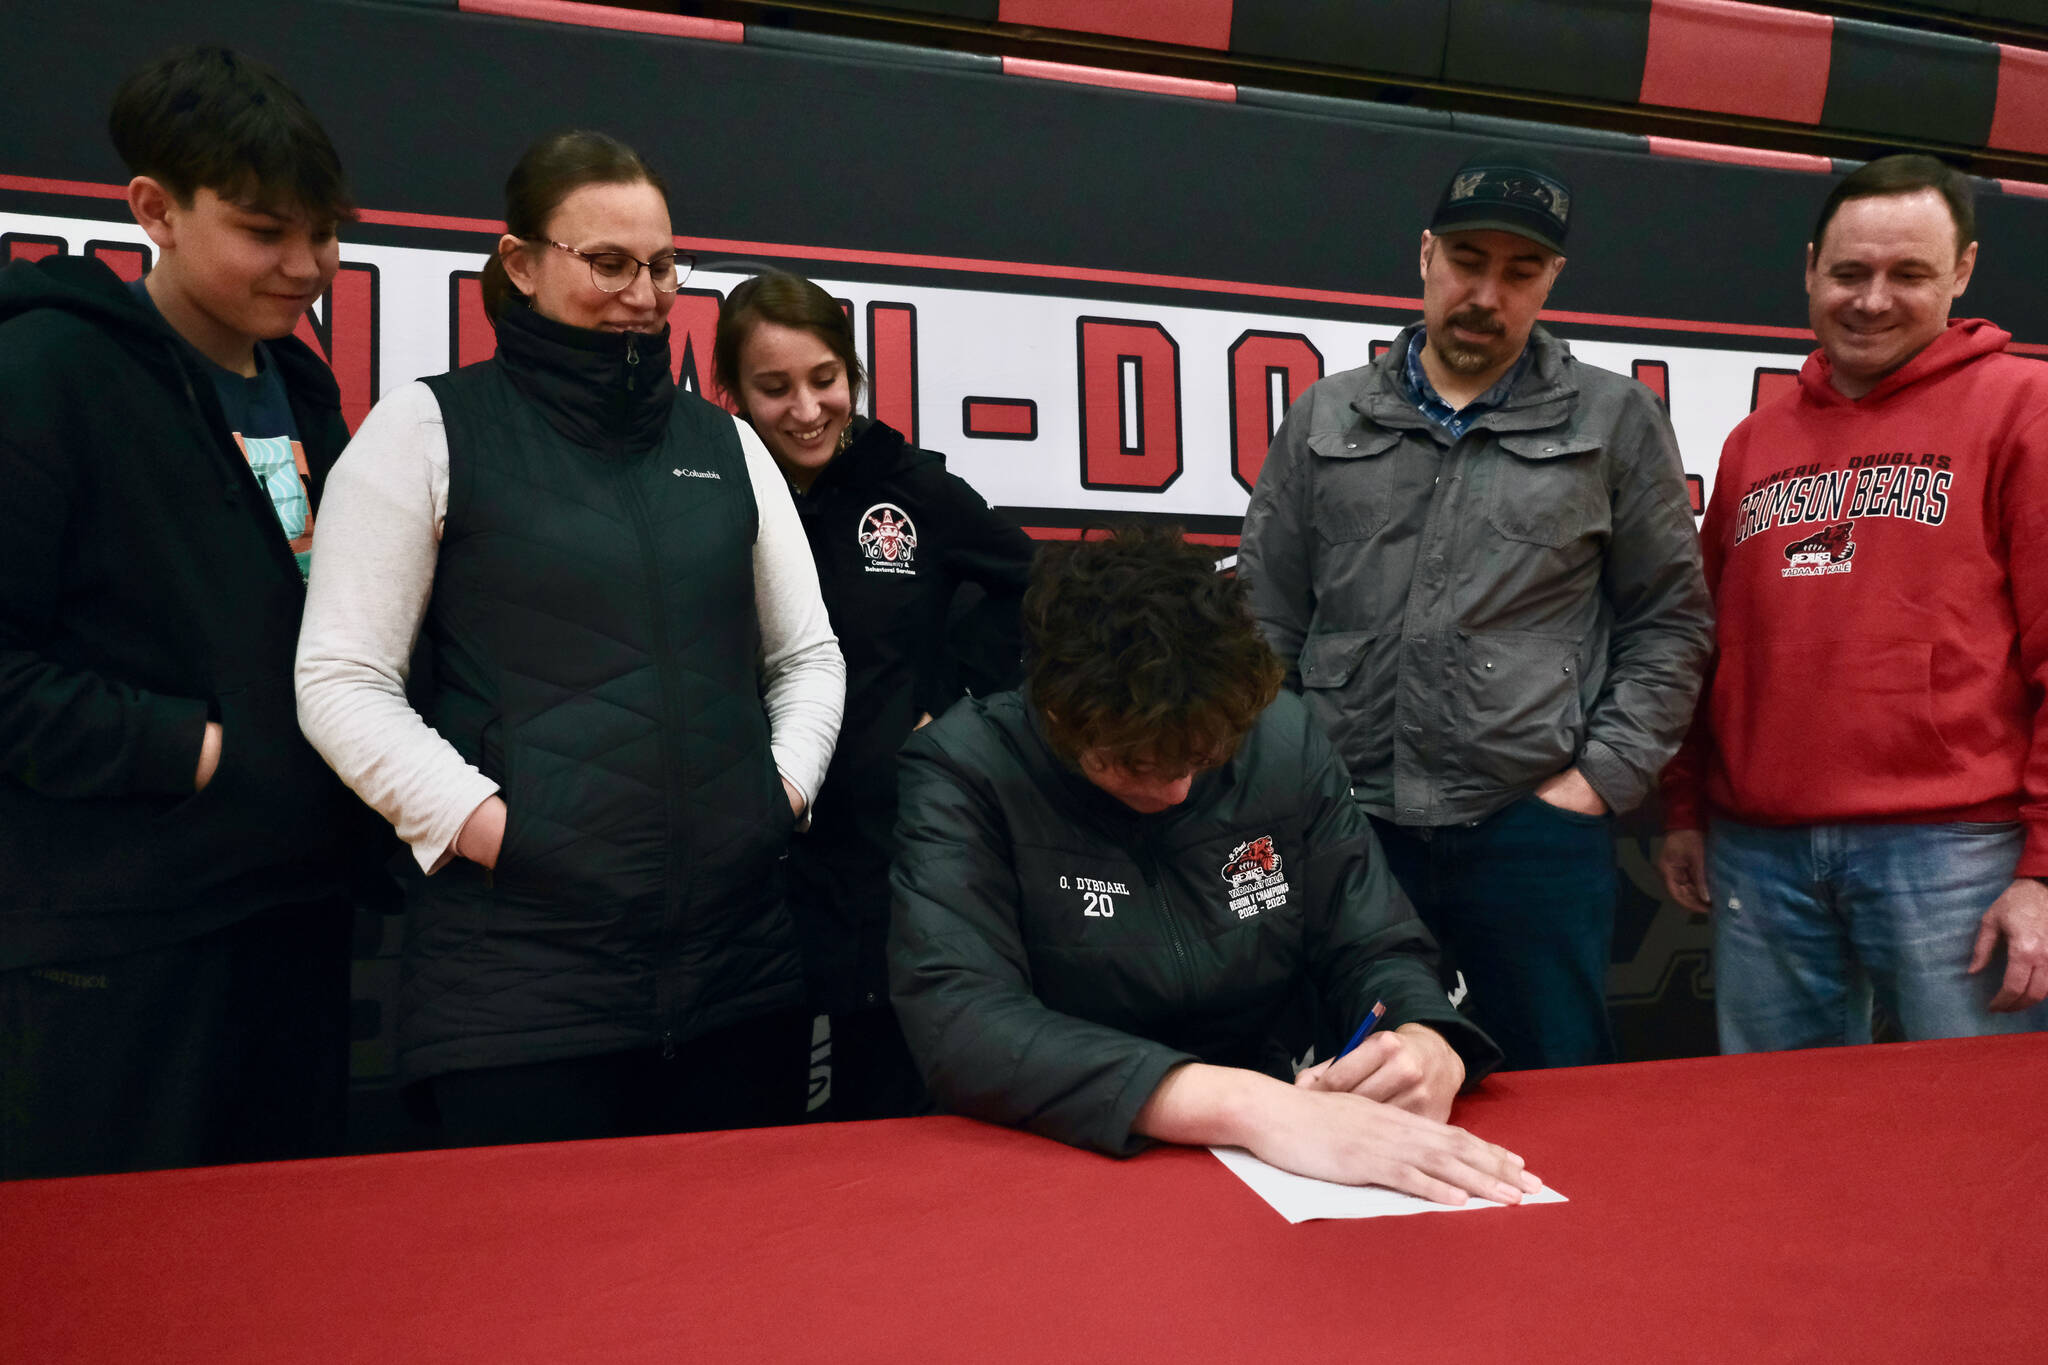 Juneau-Douglas High School: Yadaa.at Kalé Crimson Bears center Orion Dybdahl signs a letter of intent Monday to play basketball at Centralia College as brother Eli Dybdahl, mother Sarah Dybdahl, sister Michaela Demmert, father Travis Dybdahl and JDHS coach Robert Casperson look on Monday at the JDHS gym. (Klas Stolpe / Juneau Empire)